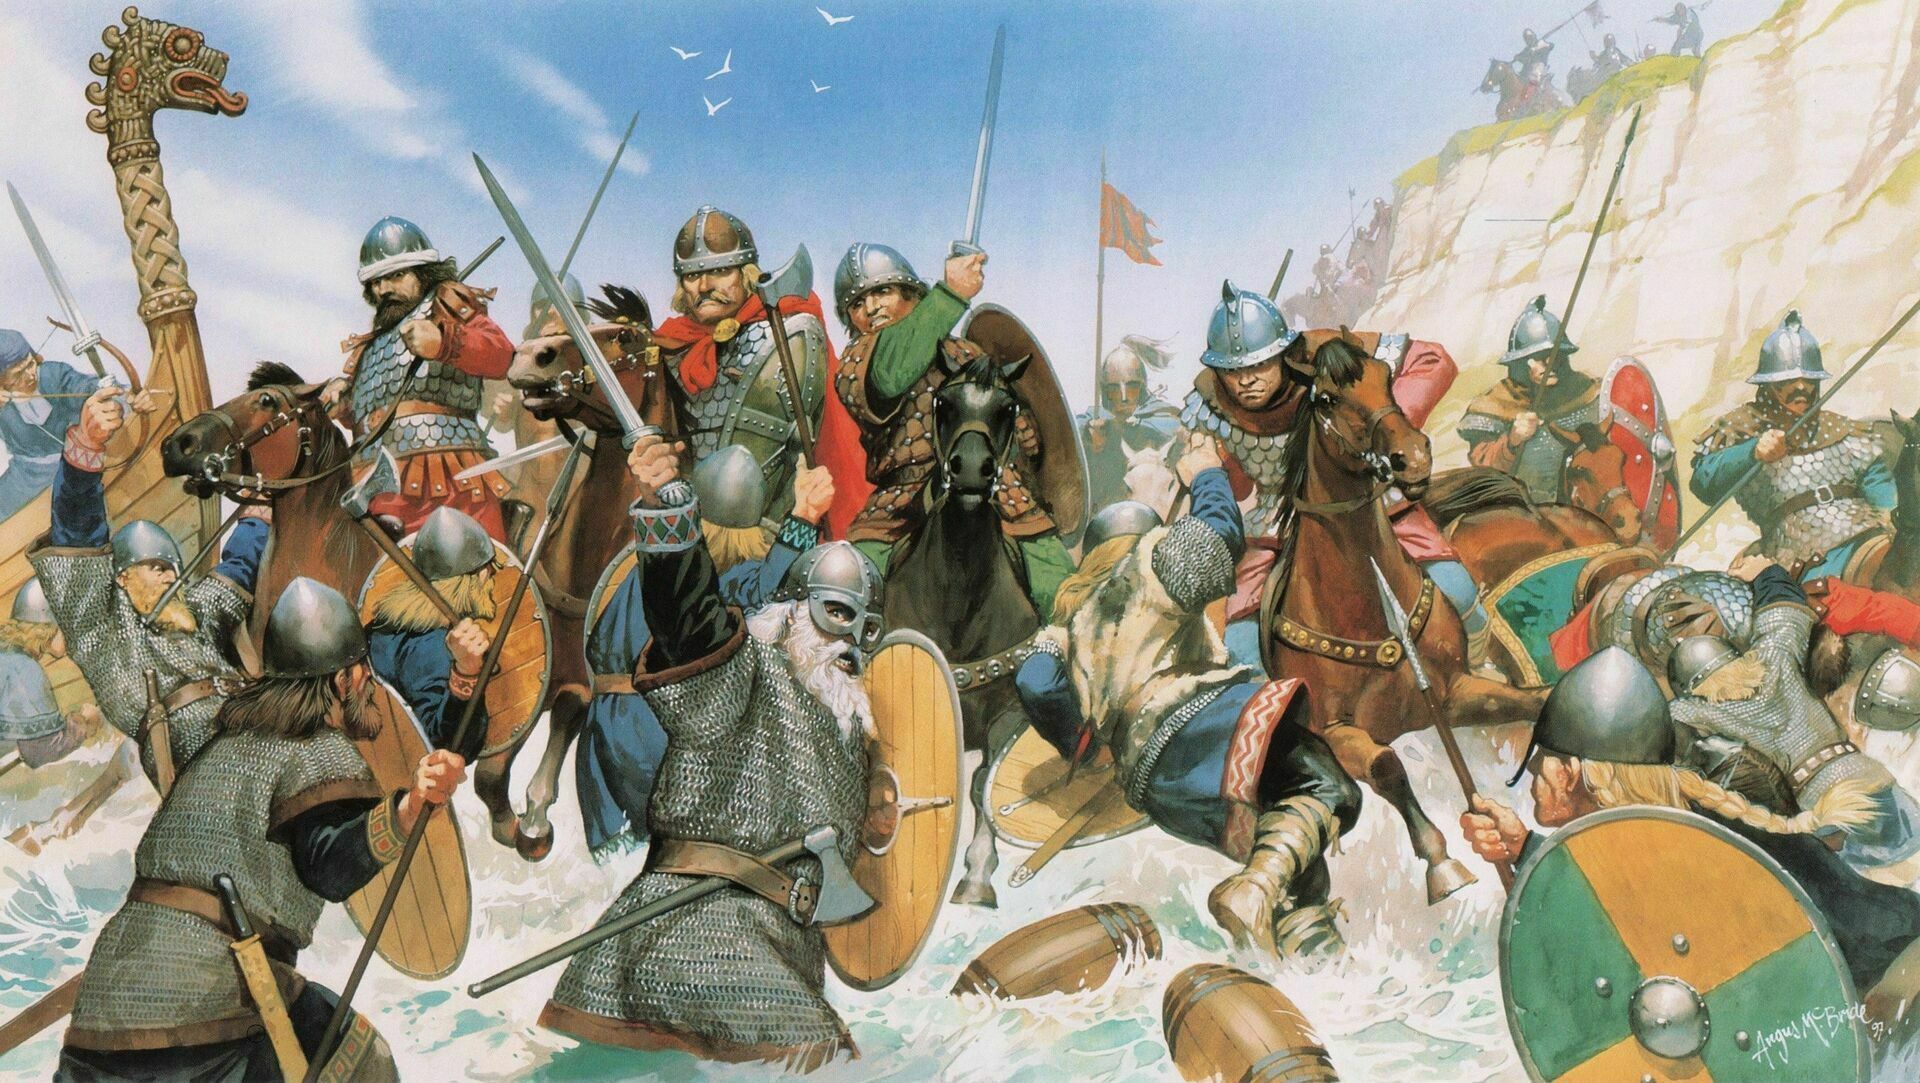 Andrey Movchan: "The Varangians came to Russia in earnest and for a long time"